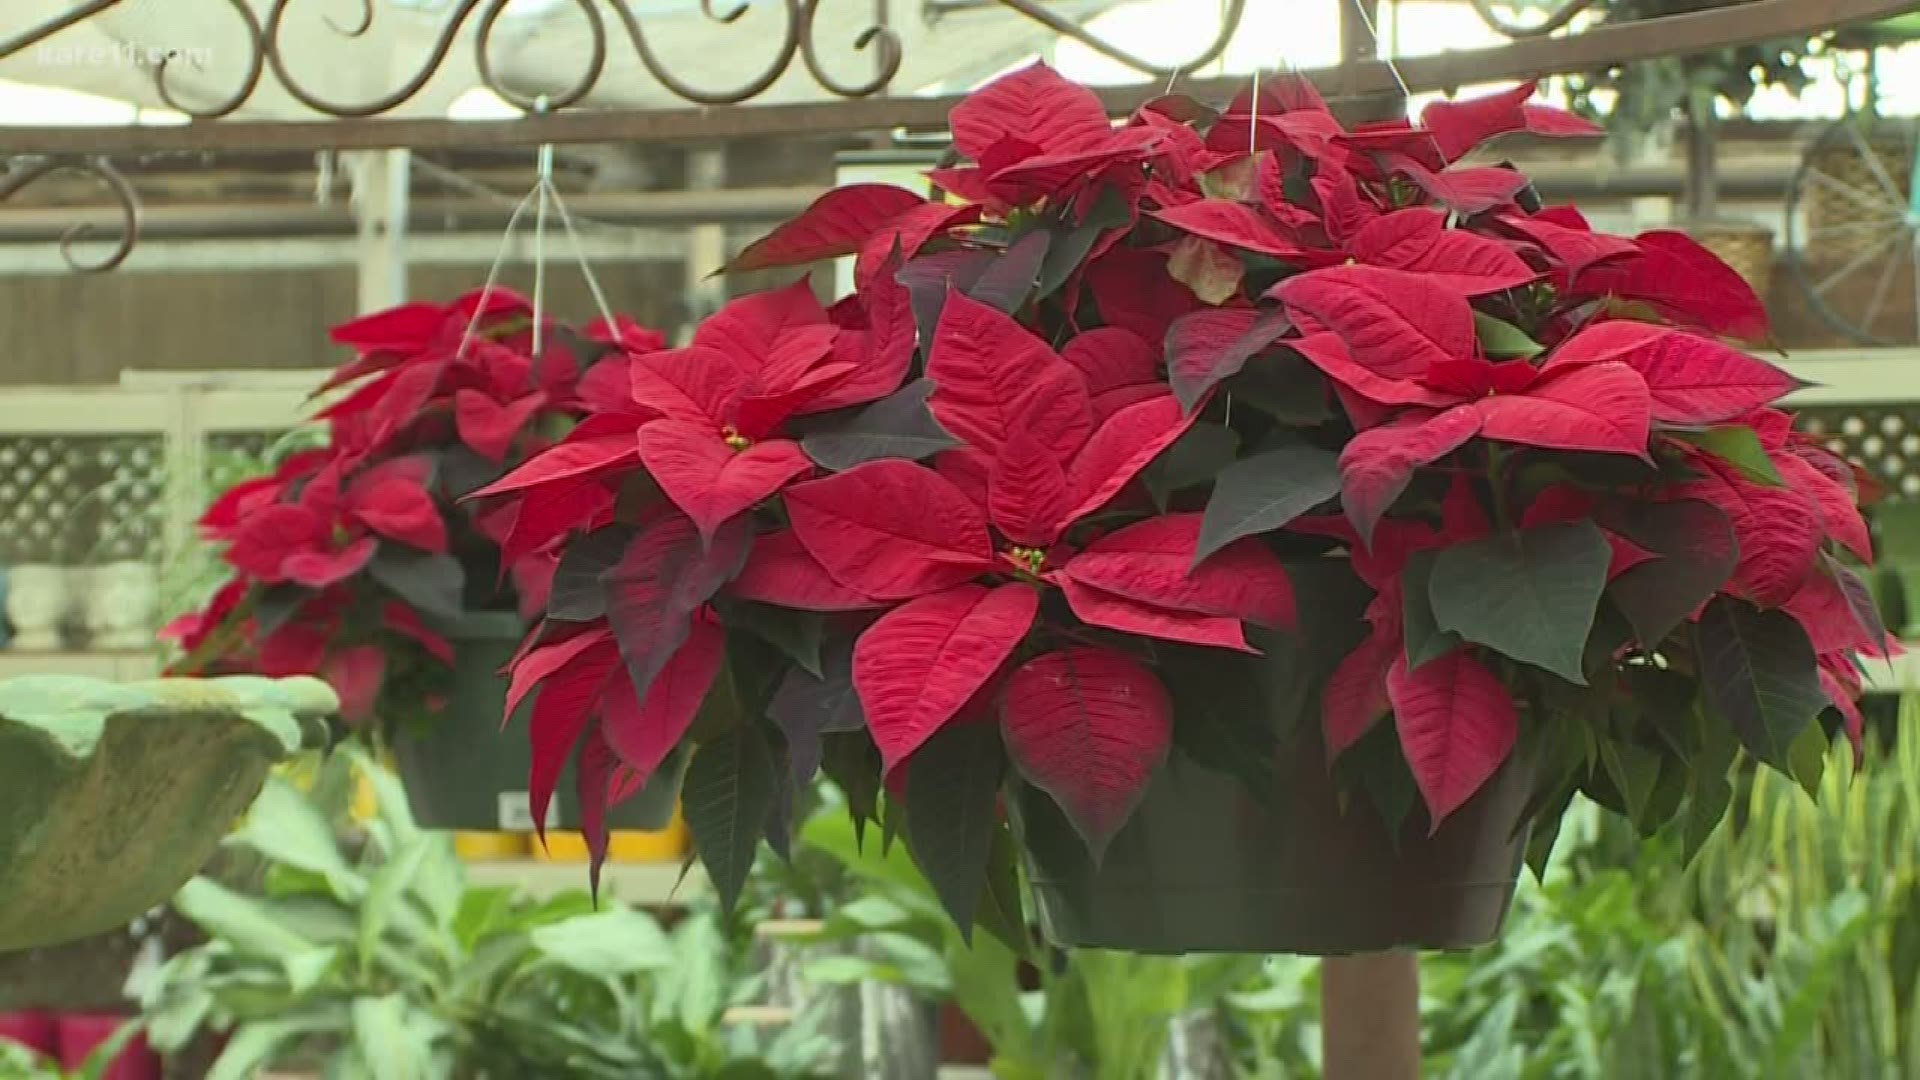 Bachman's offers recommendations for how to best care for poinsettias to ensure they look beautiful through the end of the season.